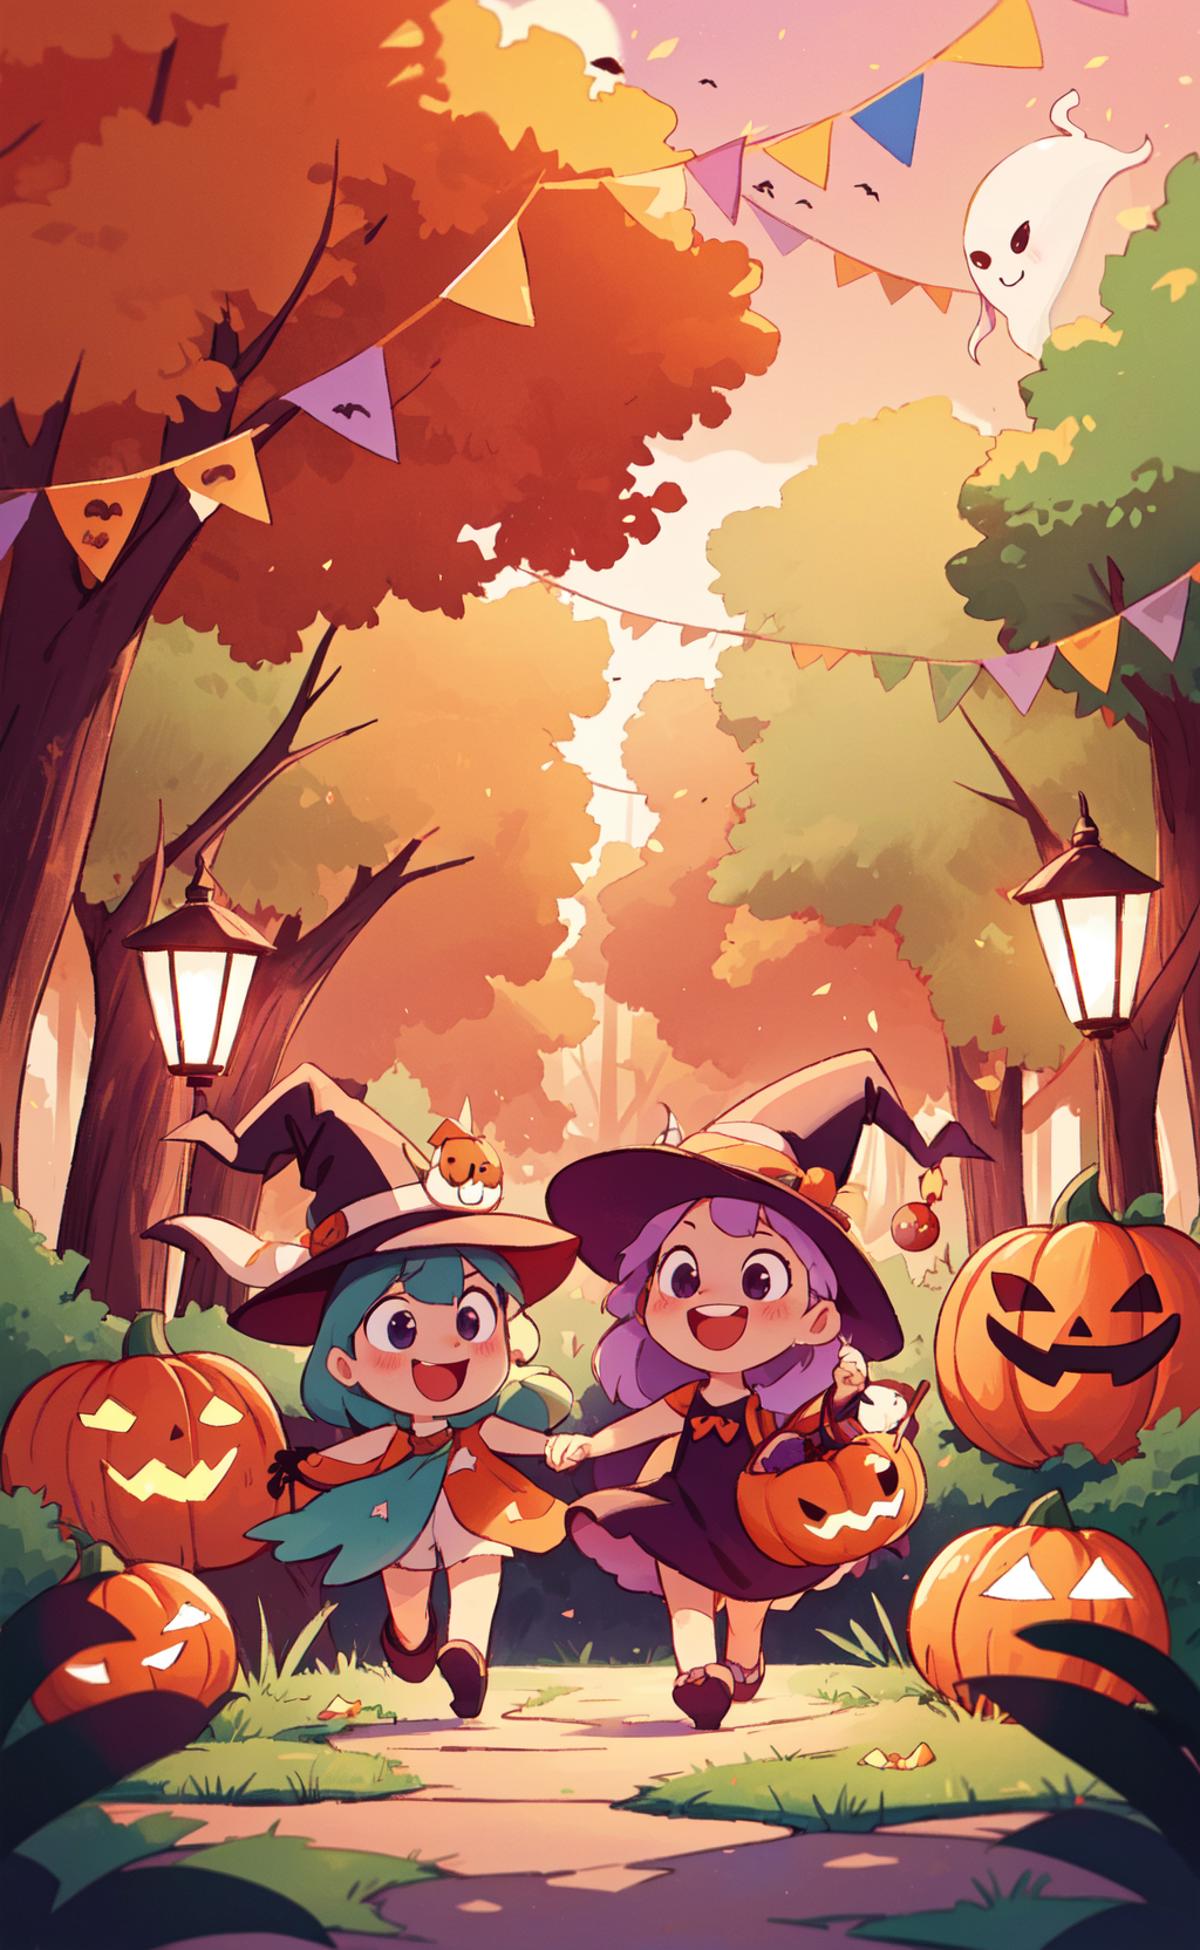 Halloween Cuteness Overload image by Bleny